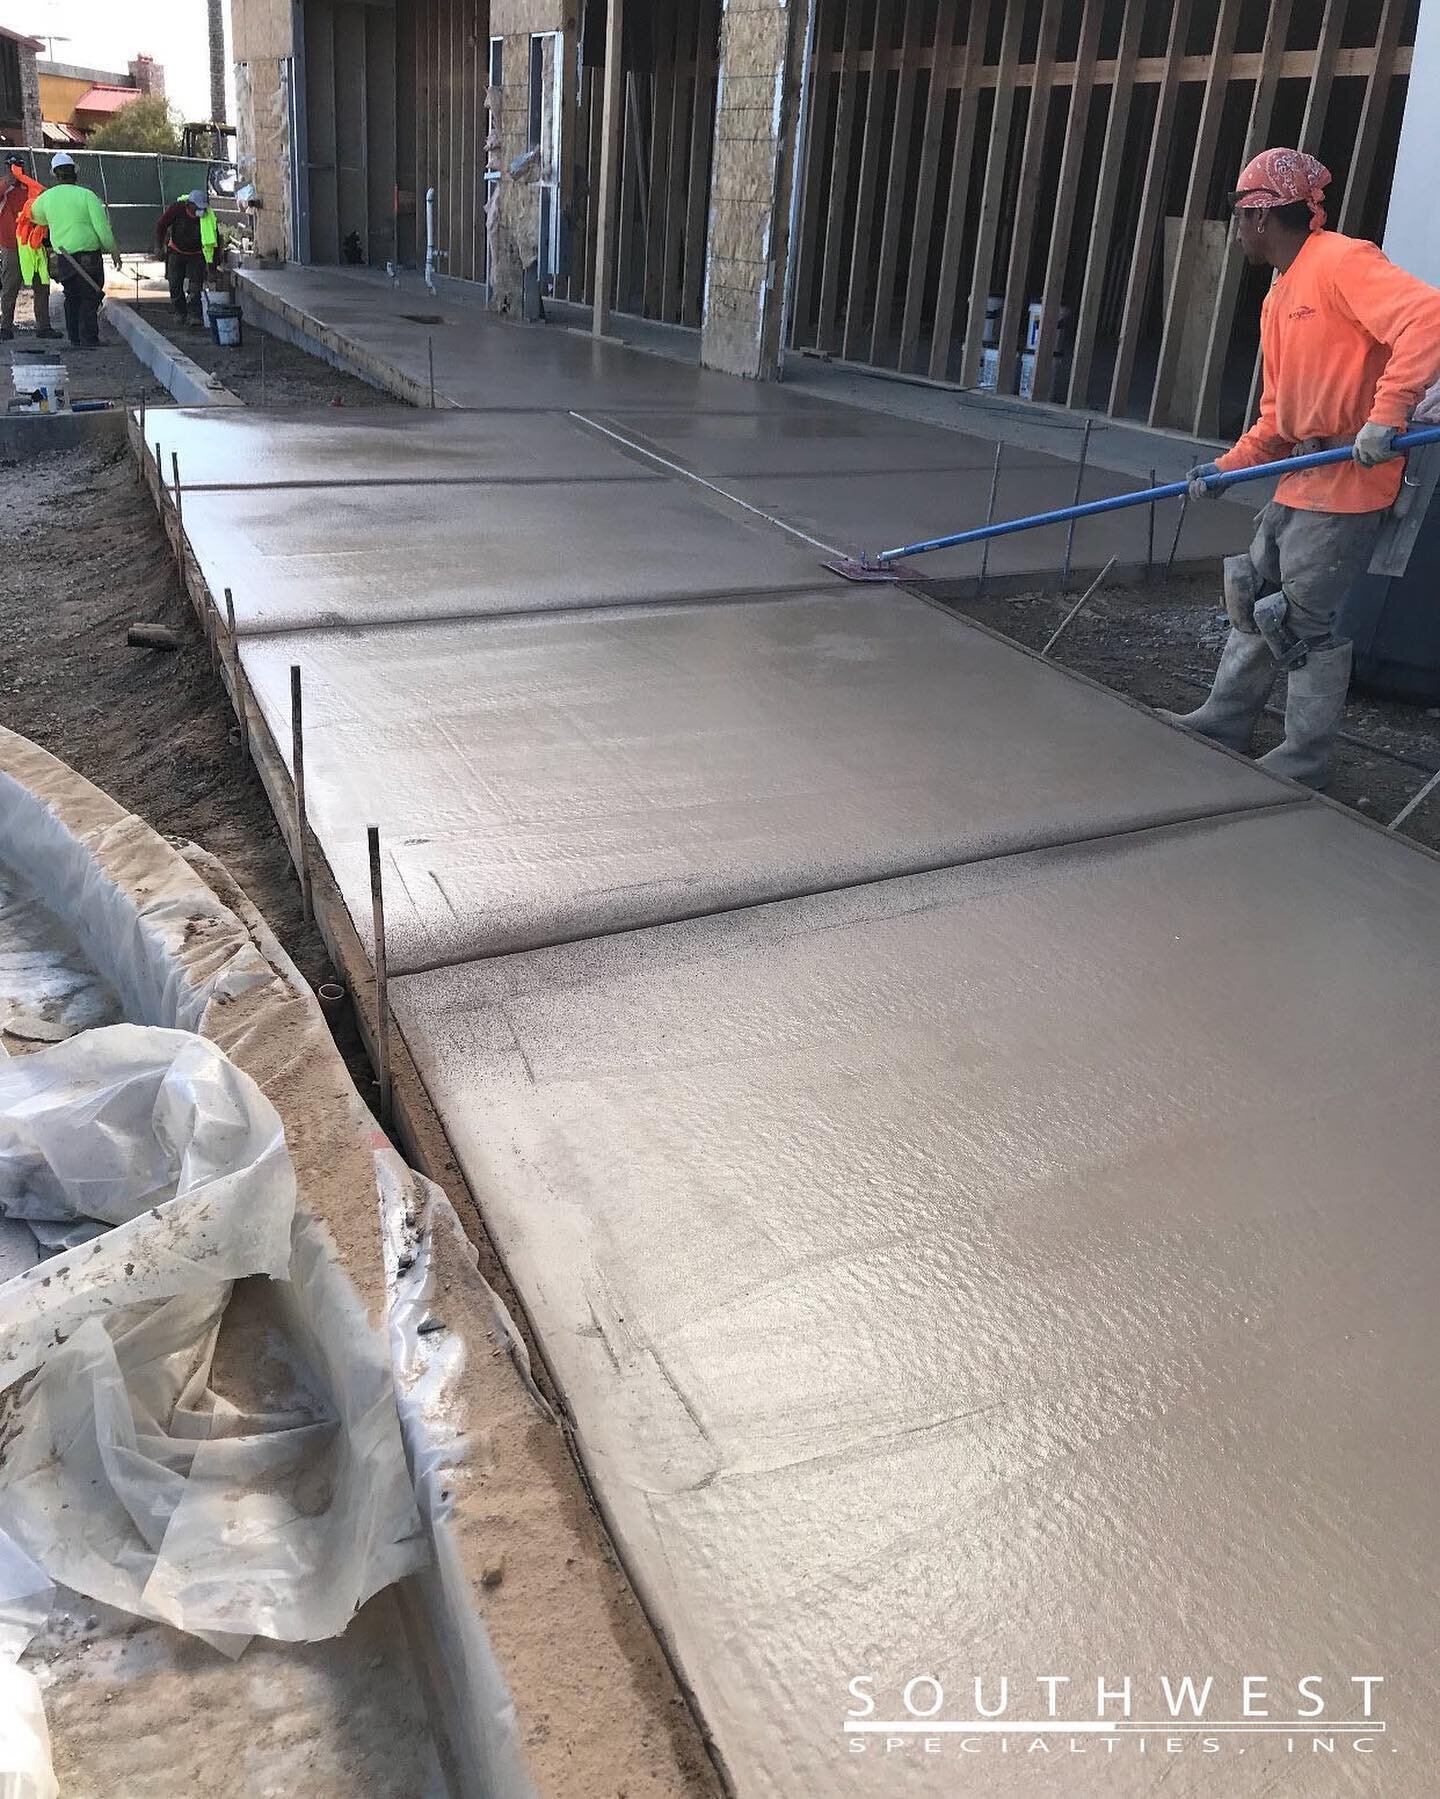 We take pride in our work and want you to feel secure and pleased with our products and services. We have 20 years of experience in #concrete-based design and construction.

We are craftsmen who are proud of our creativity and unique ability to bring